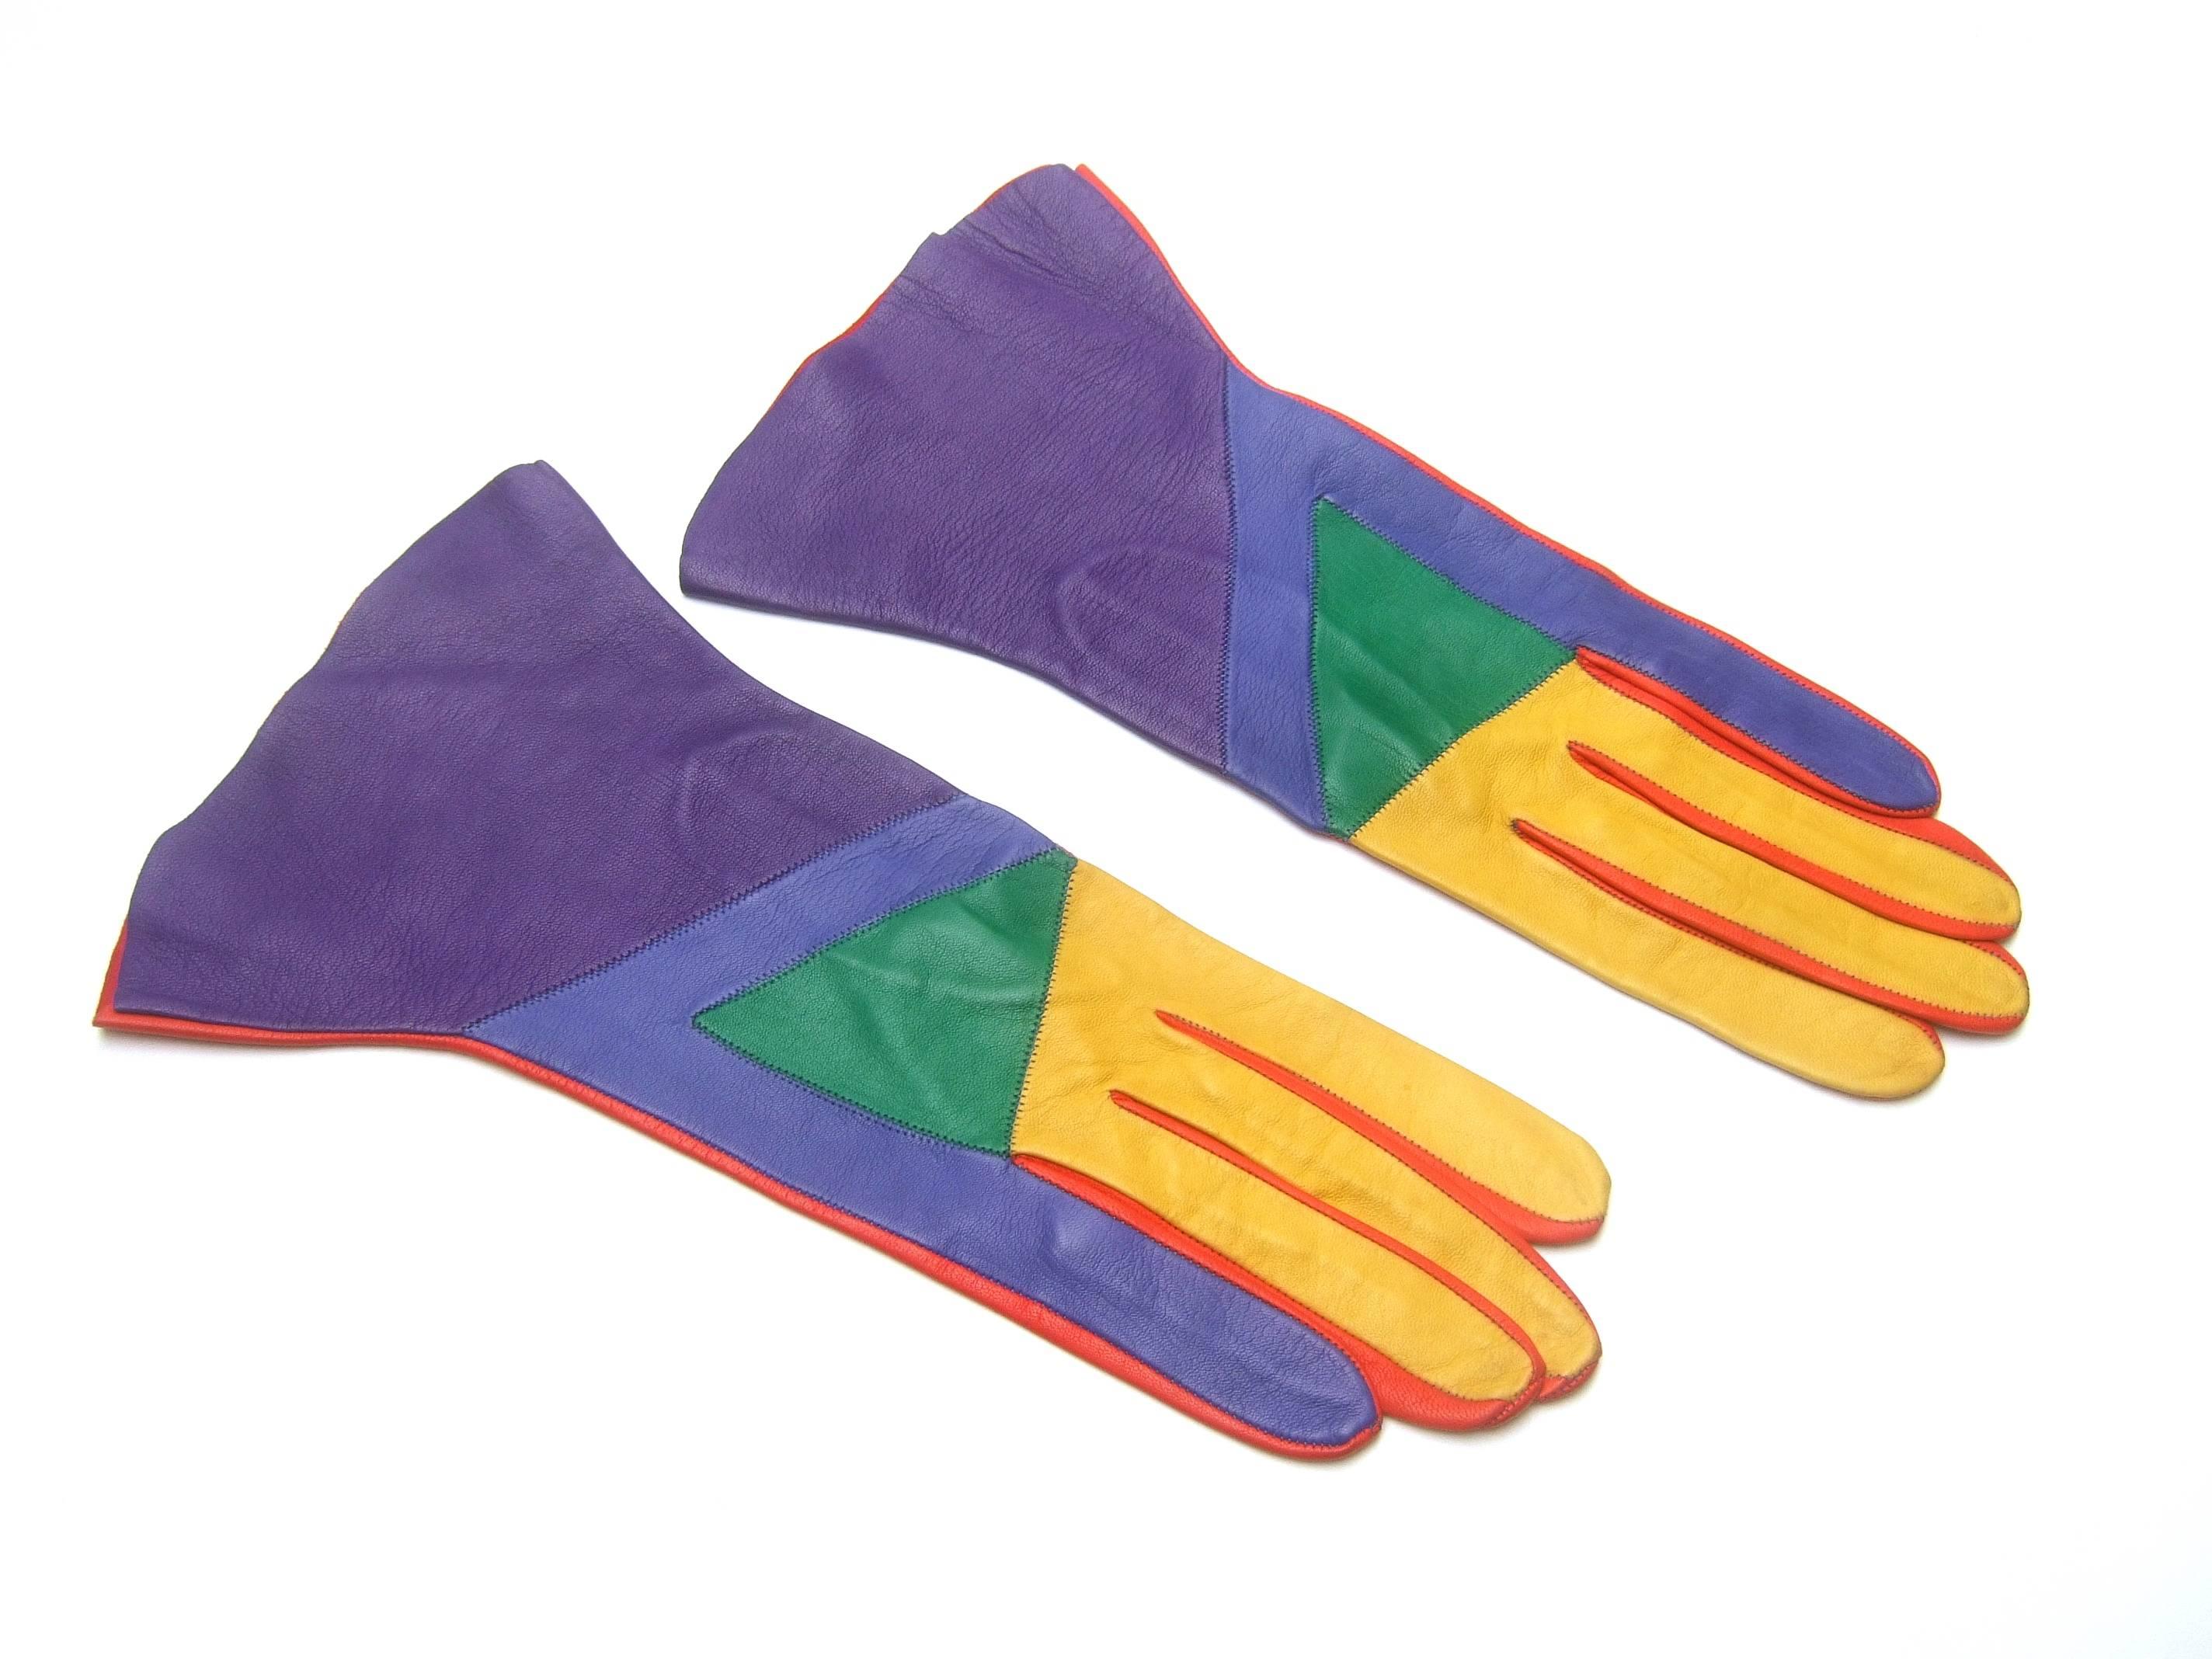 Mod Italian leather color block gloves c 1980
The chic supple leather gloves are designed 
in a spectrum of with vibrant primary colors 

In contrast the underneath leather is solid
red leather

Makes a very stylish unique accessory